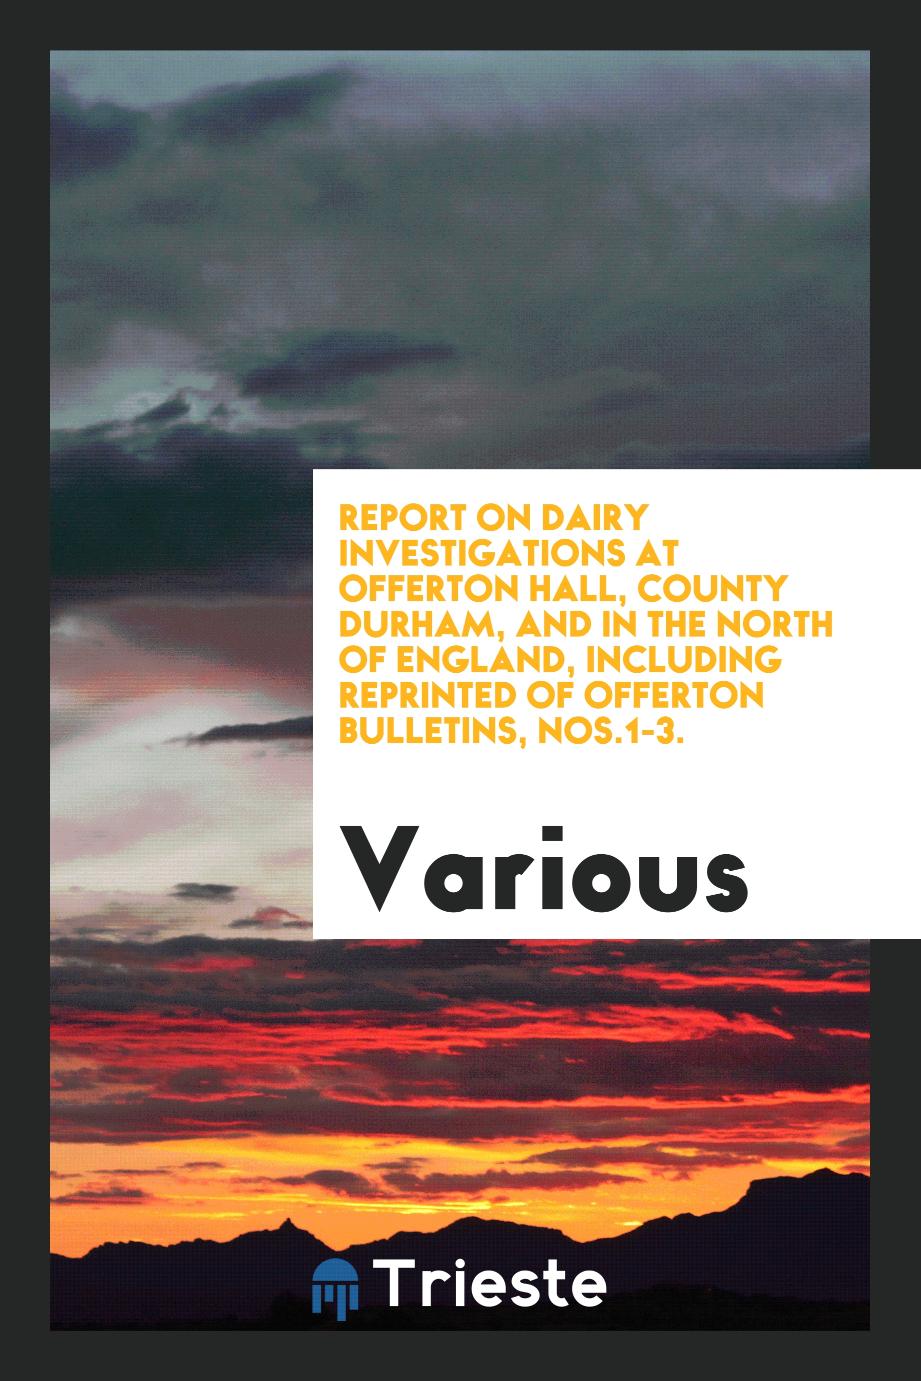 Report on dairy investigations at Offerton Hall, County Durham, and in the north of England, including reprinted of Offerton bulletins, Nos.1-3.